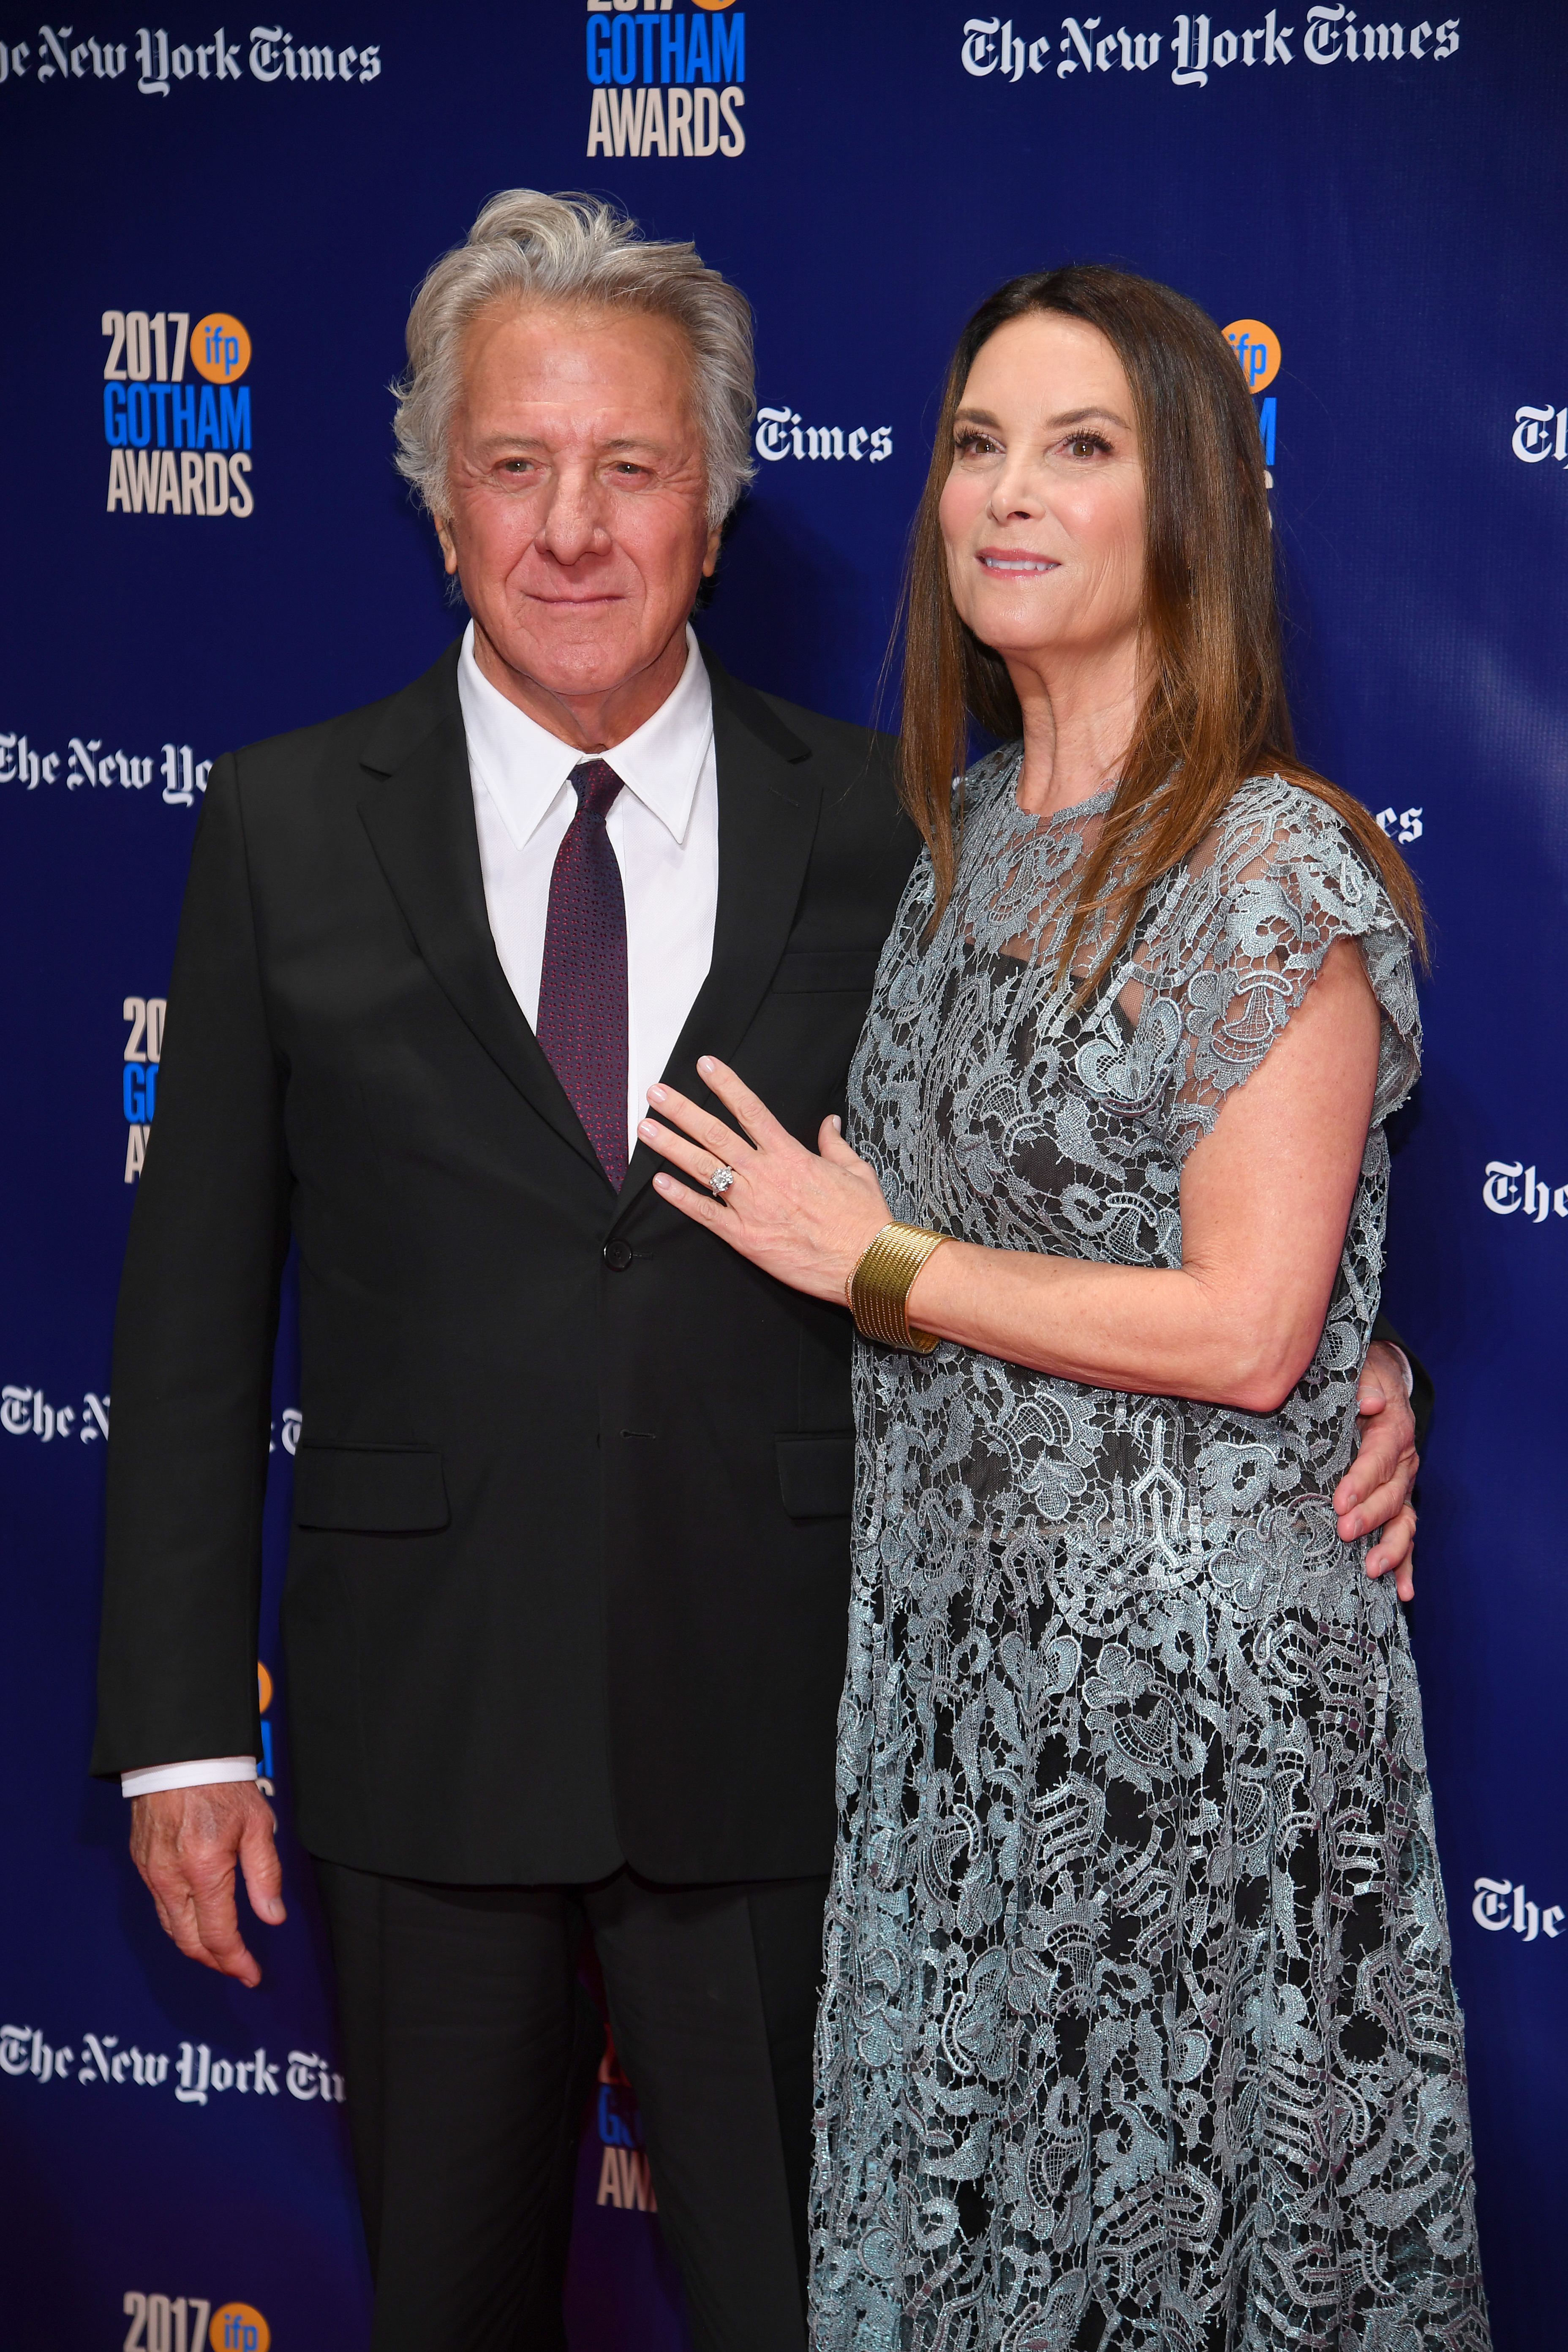 Dustin Hoffman and Lisa Hoffman at the IFP's 27th Annual Gotham Independent Film Awards in New York City on November 27, 2017. | Source: Getty Images